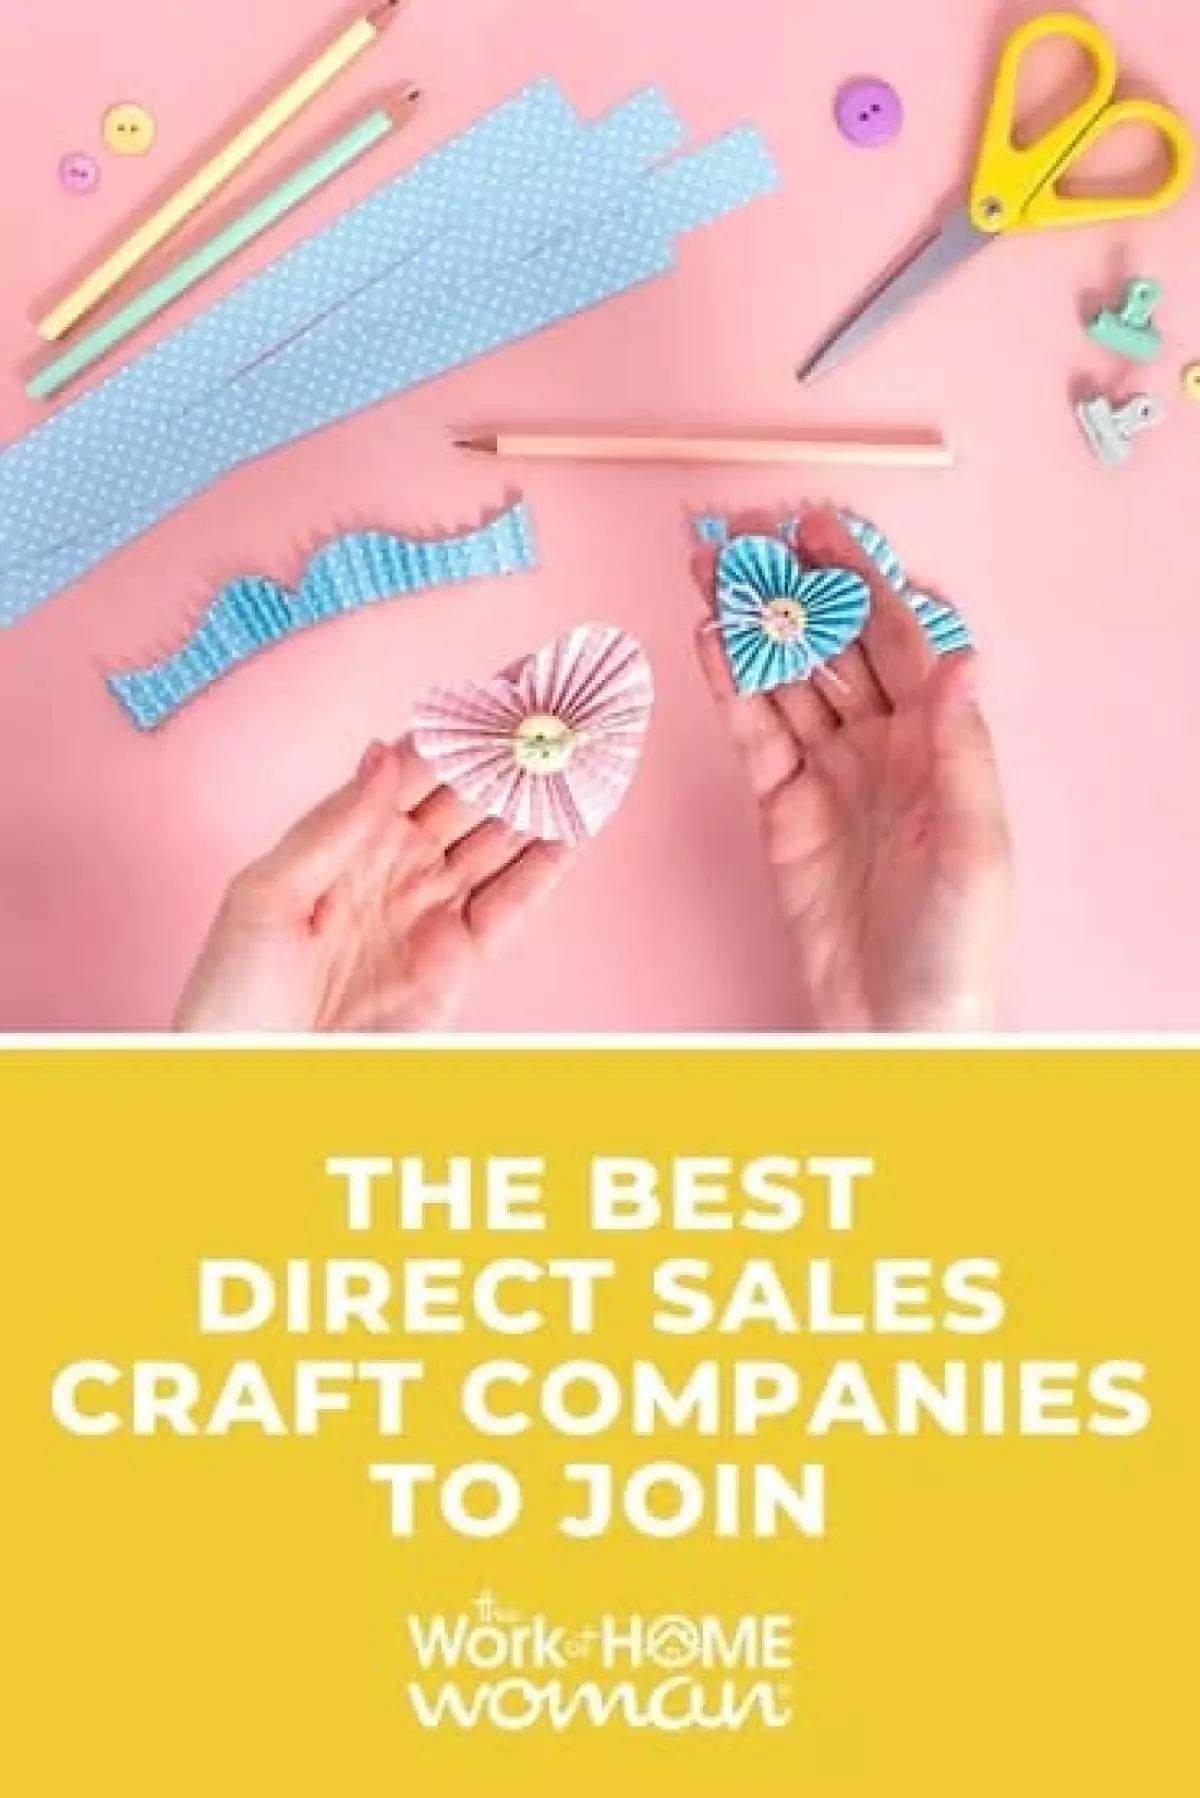 Do you love to create? Here's a look at the best direct sales craft companies and what you can expect in terms of earnings or start-up costs.